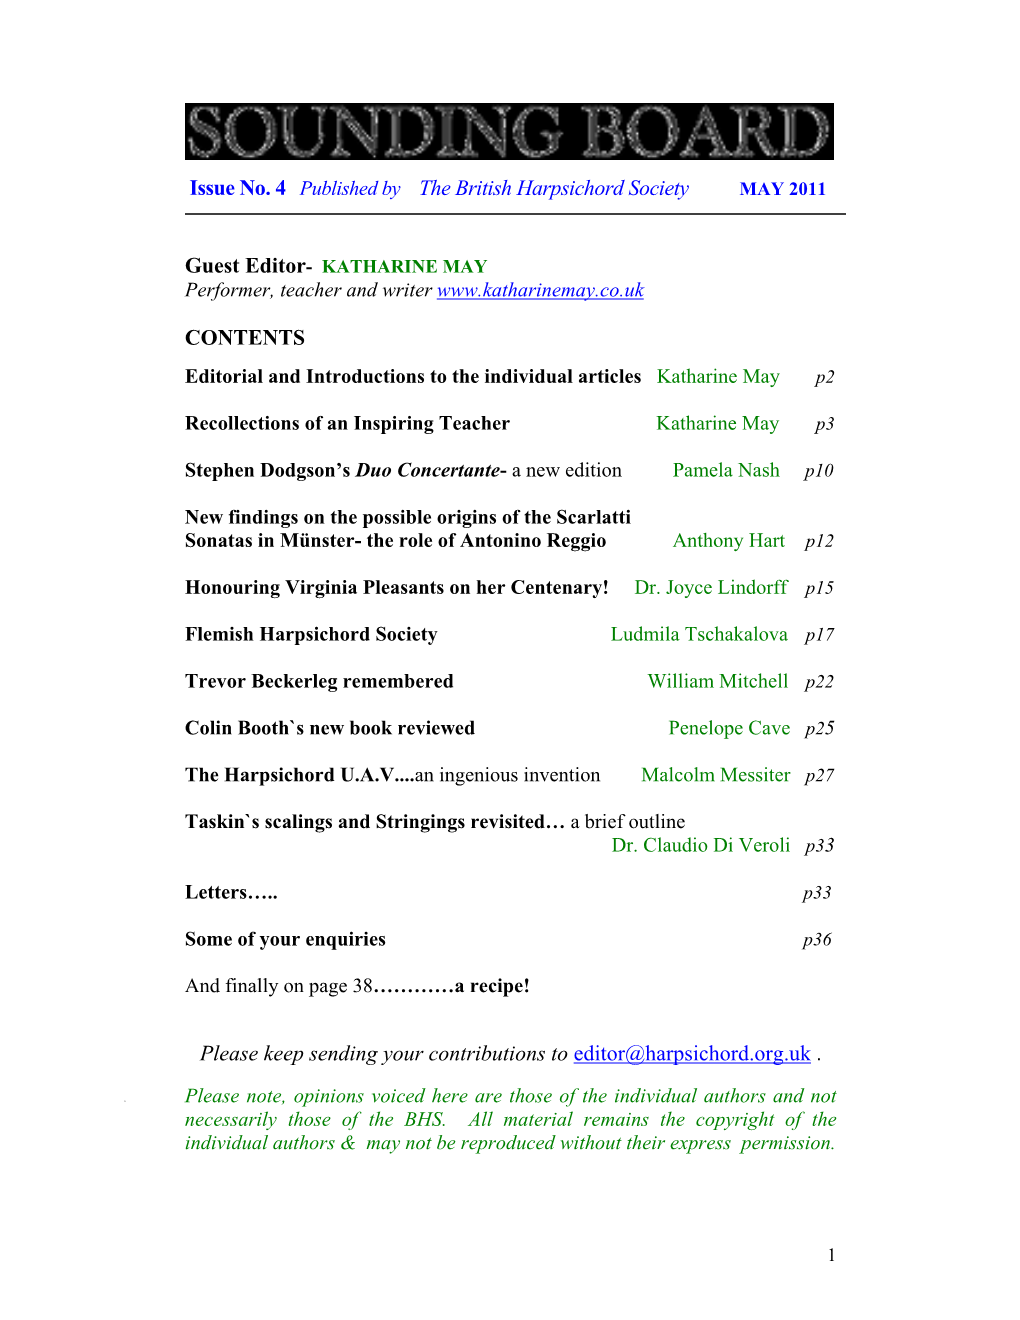 Issue No. 4 Published by the British Harpsichord Society CONTENTS